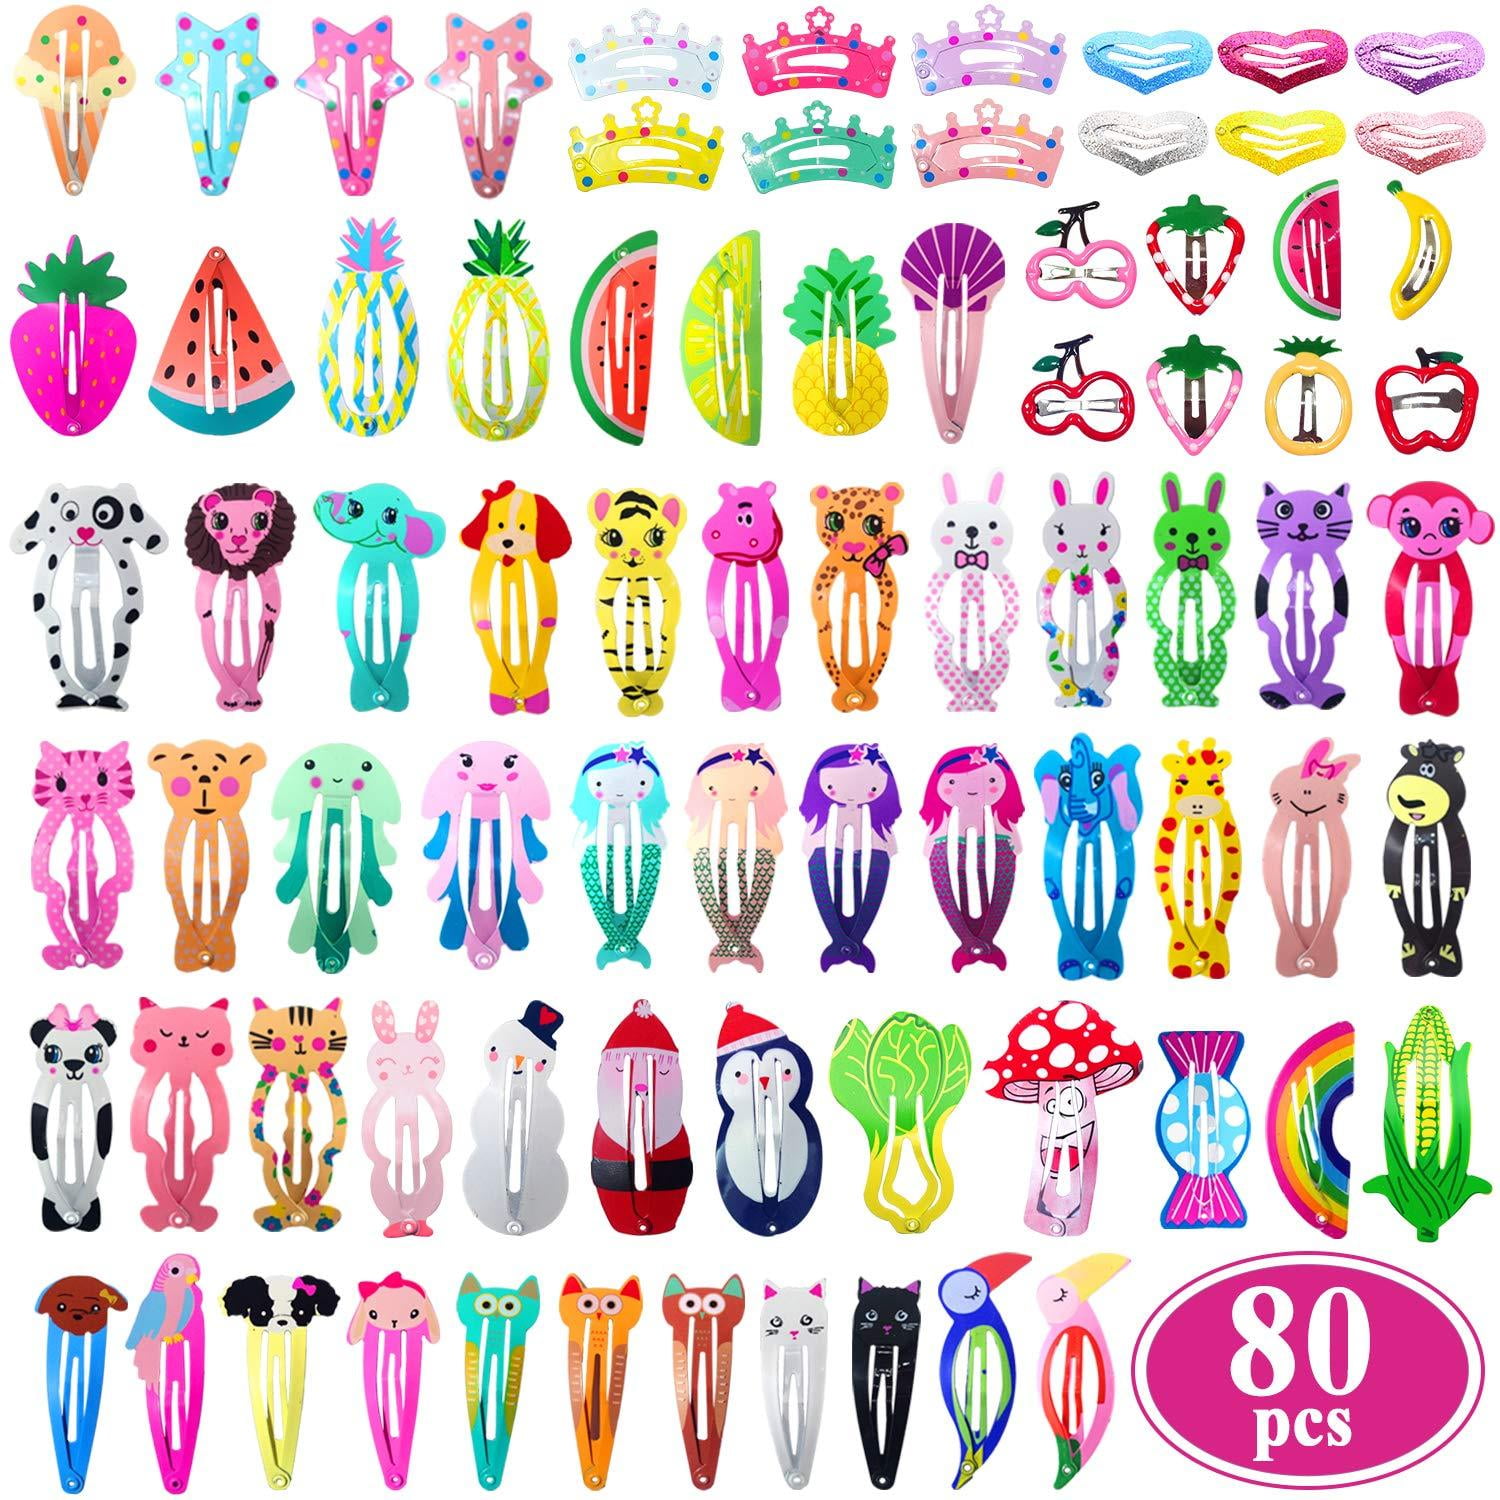 Juedy 20 PCS Hair Clips Kits Barrettes Hair Clip Hairpins Gift for Girls and Kids Headwear Styling Tools 